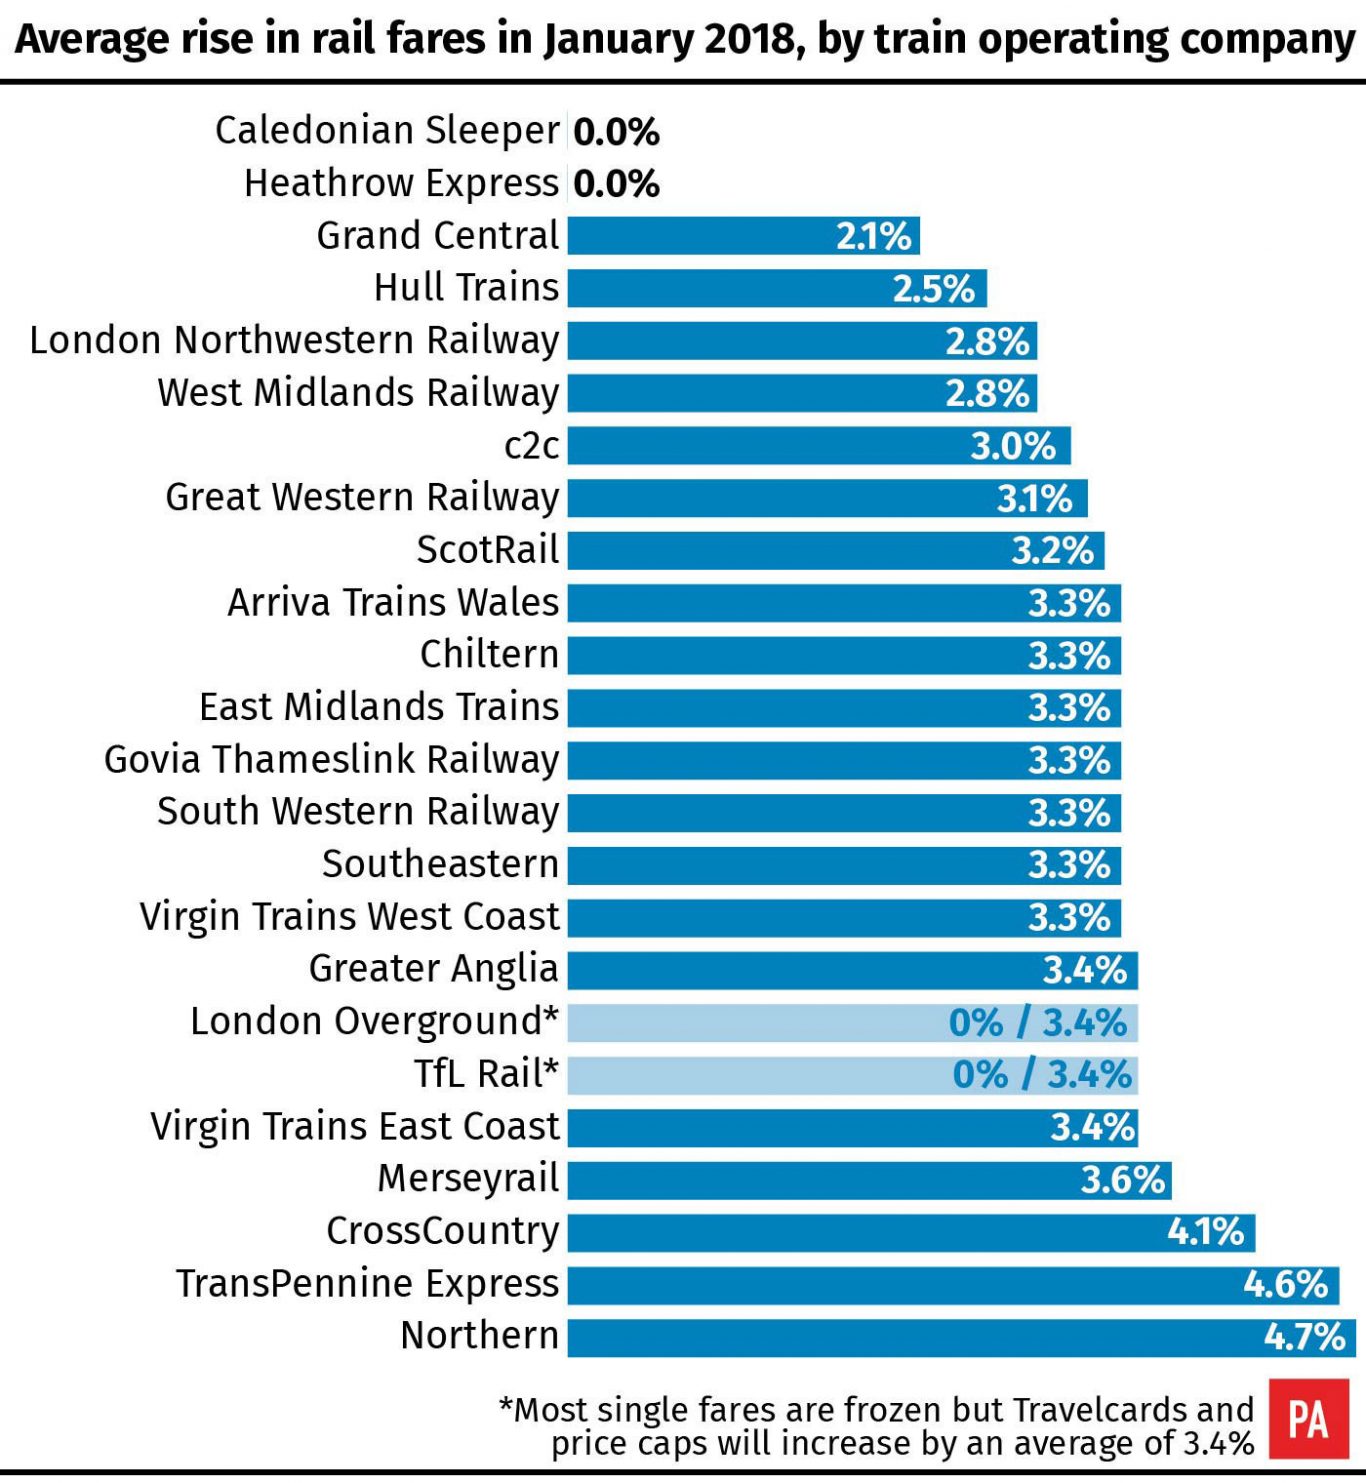 Average rise in rail fares in January 2018, by train operating company